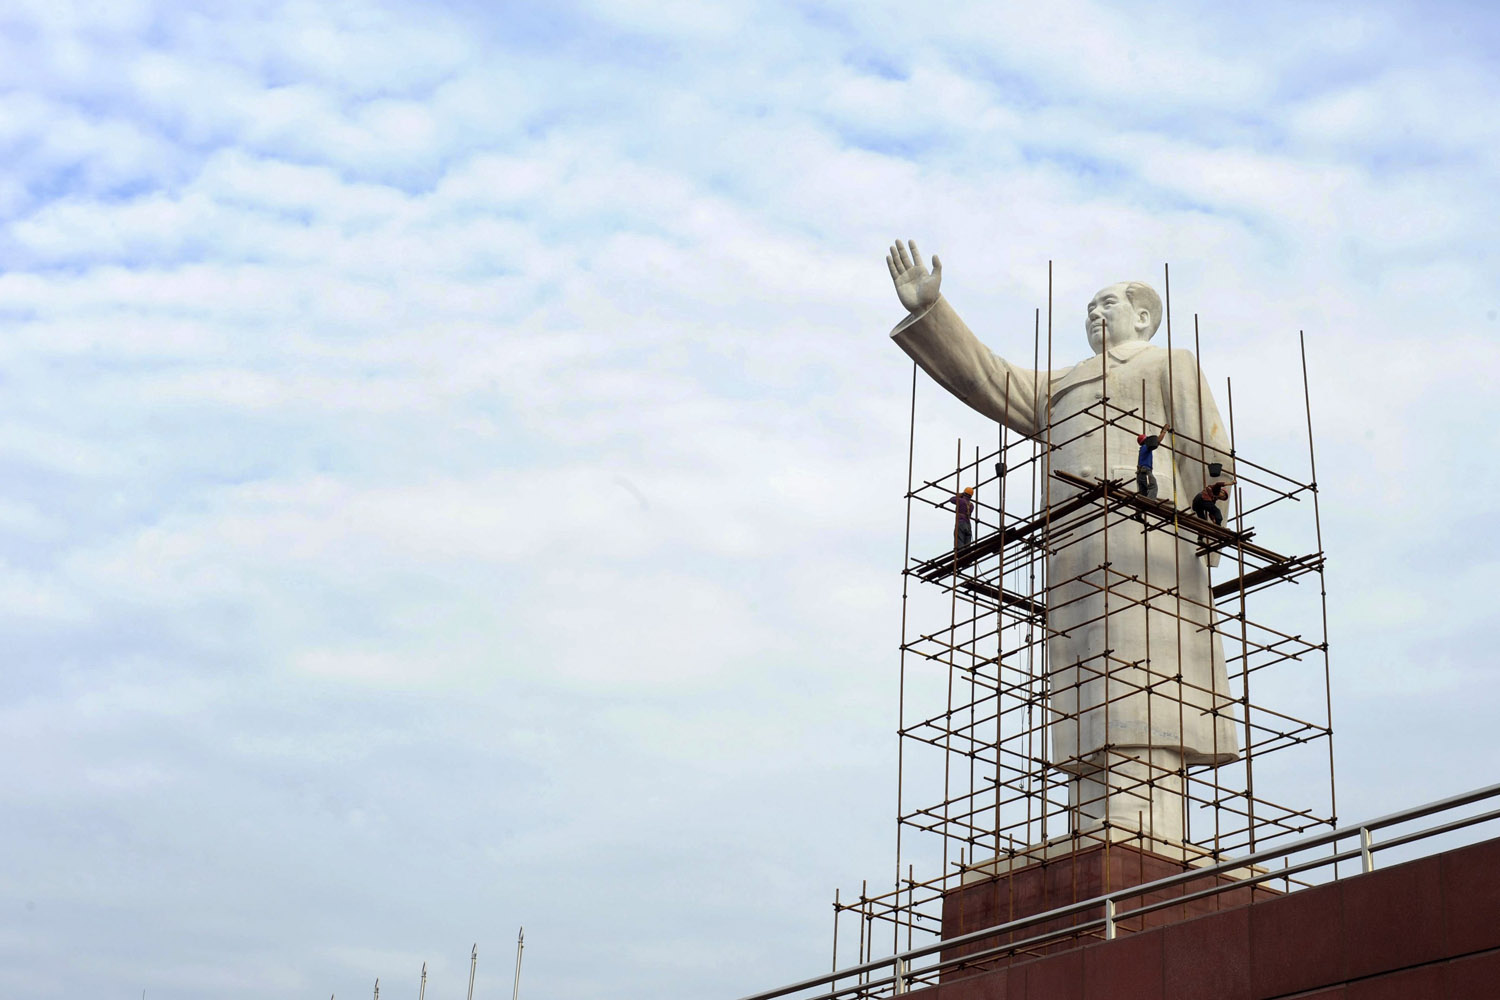 Labourers set up scaffolding to clean a statue of China's late chairman Mao Zedong for the upcoming Chinese National Day at Tianfu Square in Chengdu, Sichuan province